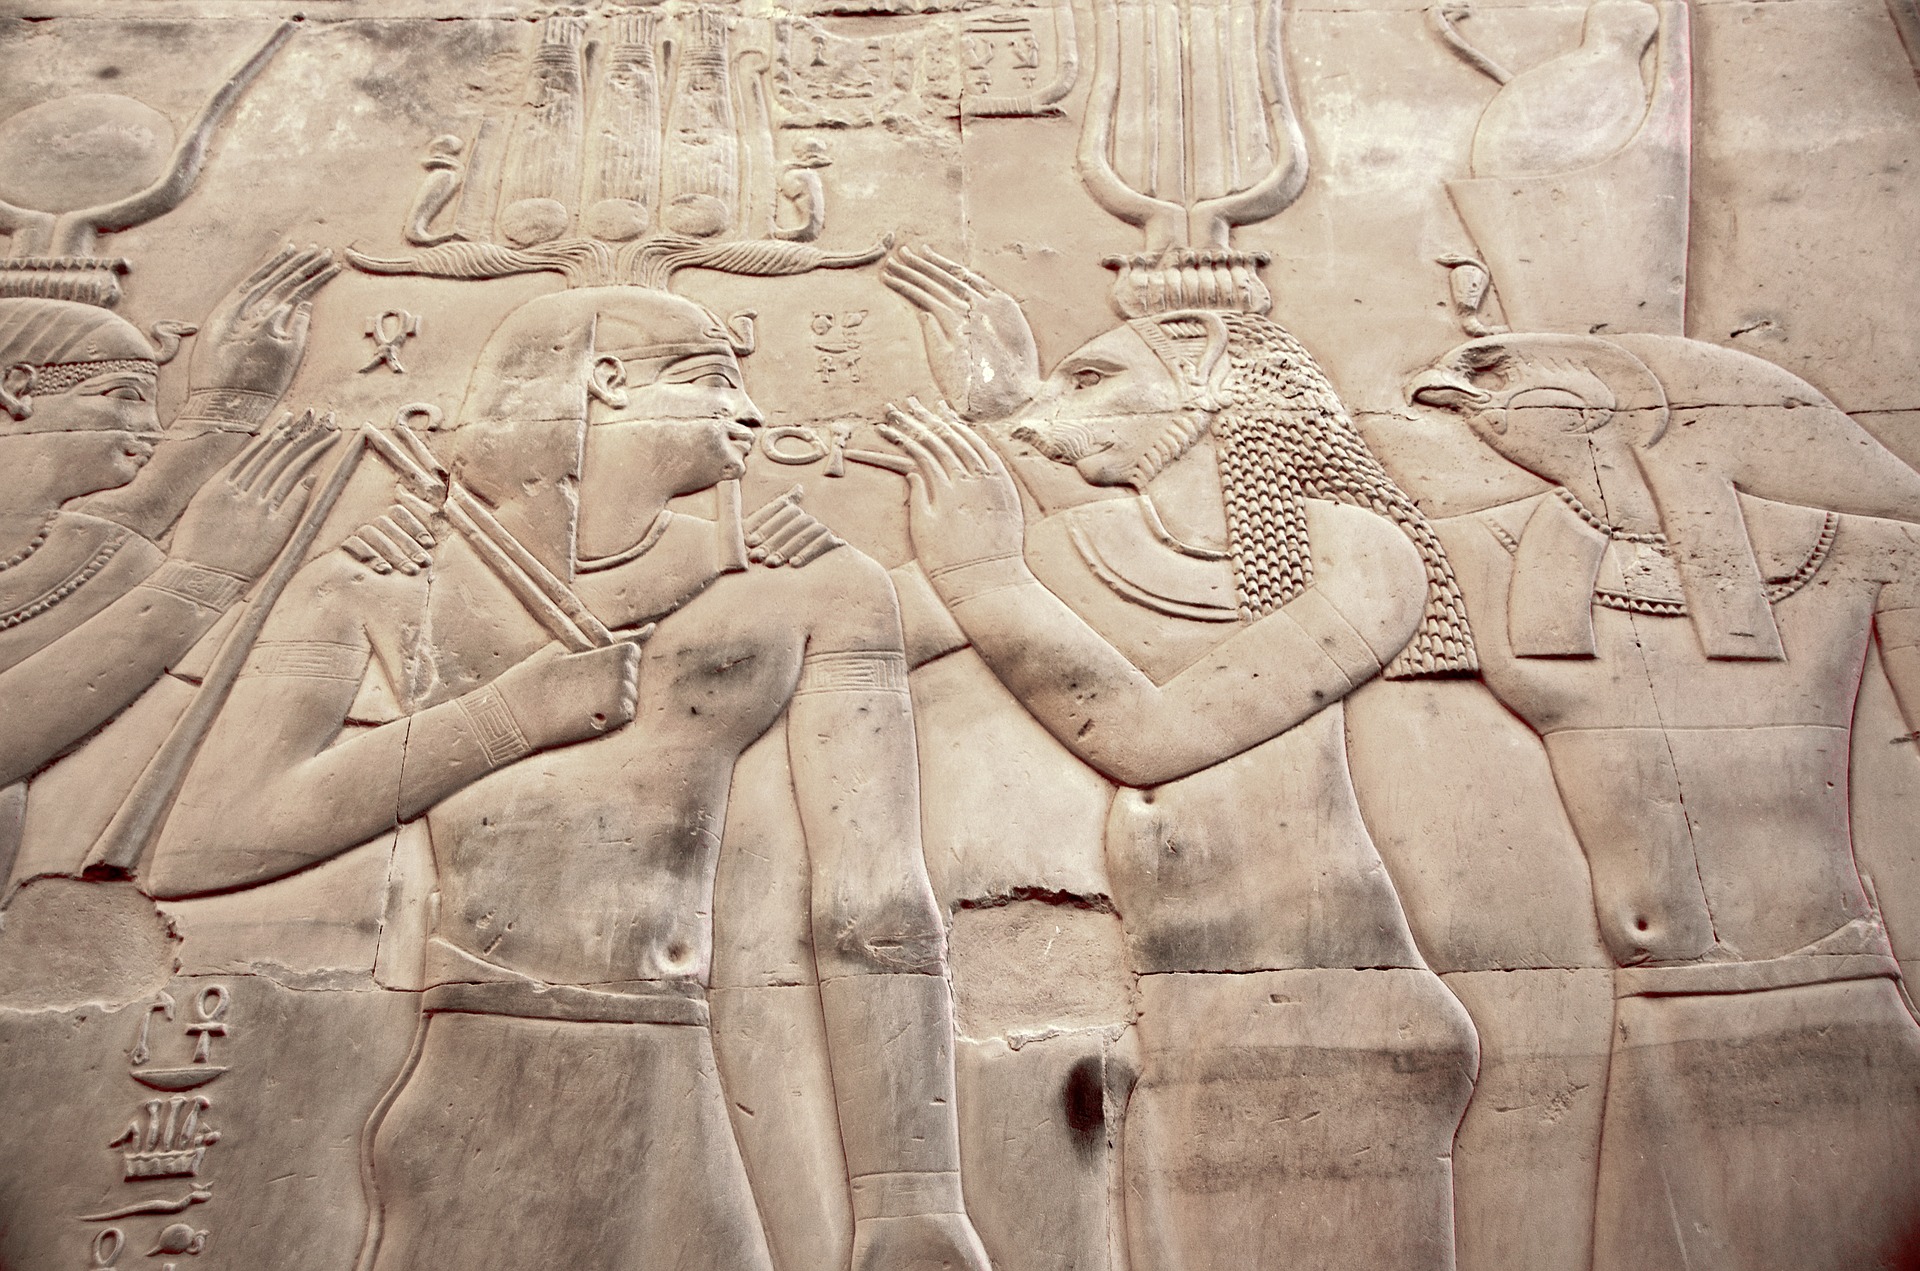 Egypt has revealed the unknown secrets of the pharaohs